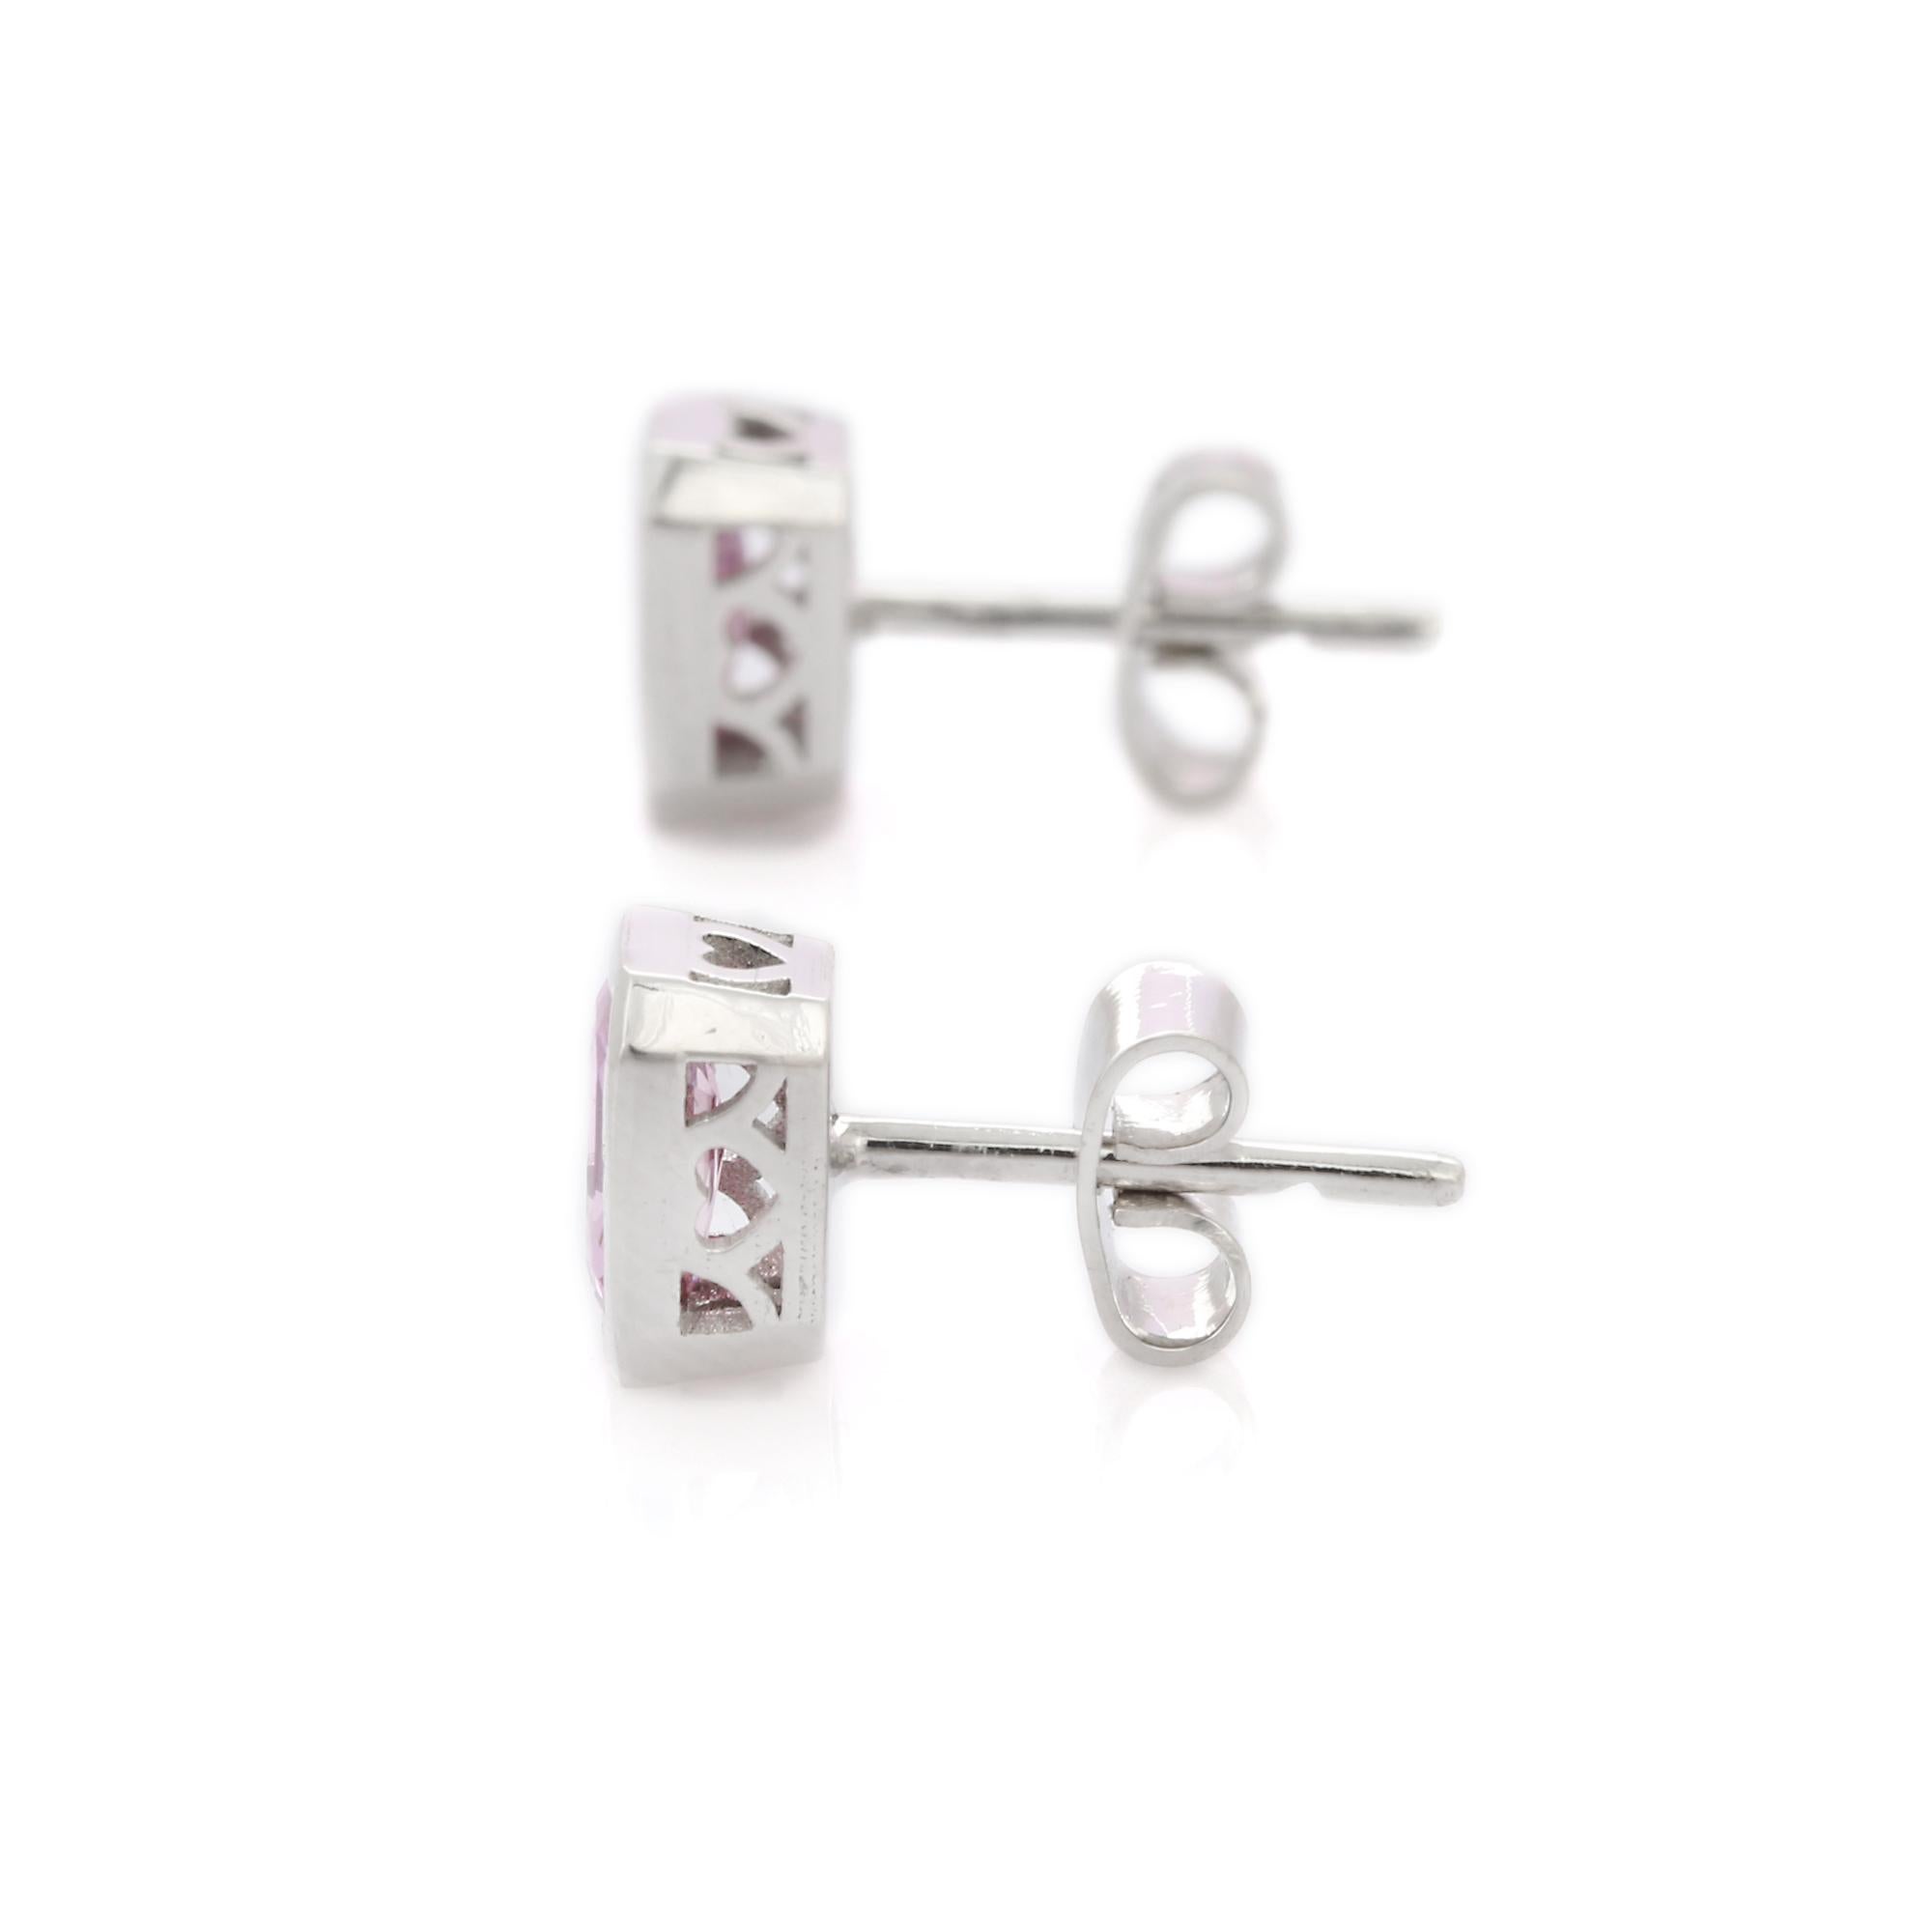 Octagon Cut Natural Faceted Pink Sapphire 1.64 Carat Gold Stud Earring in 18K White Gold For Sale